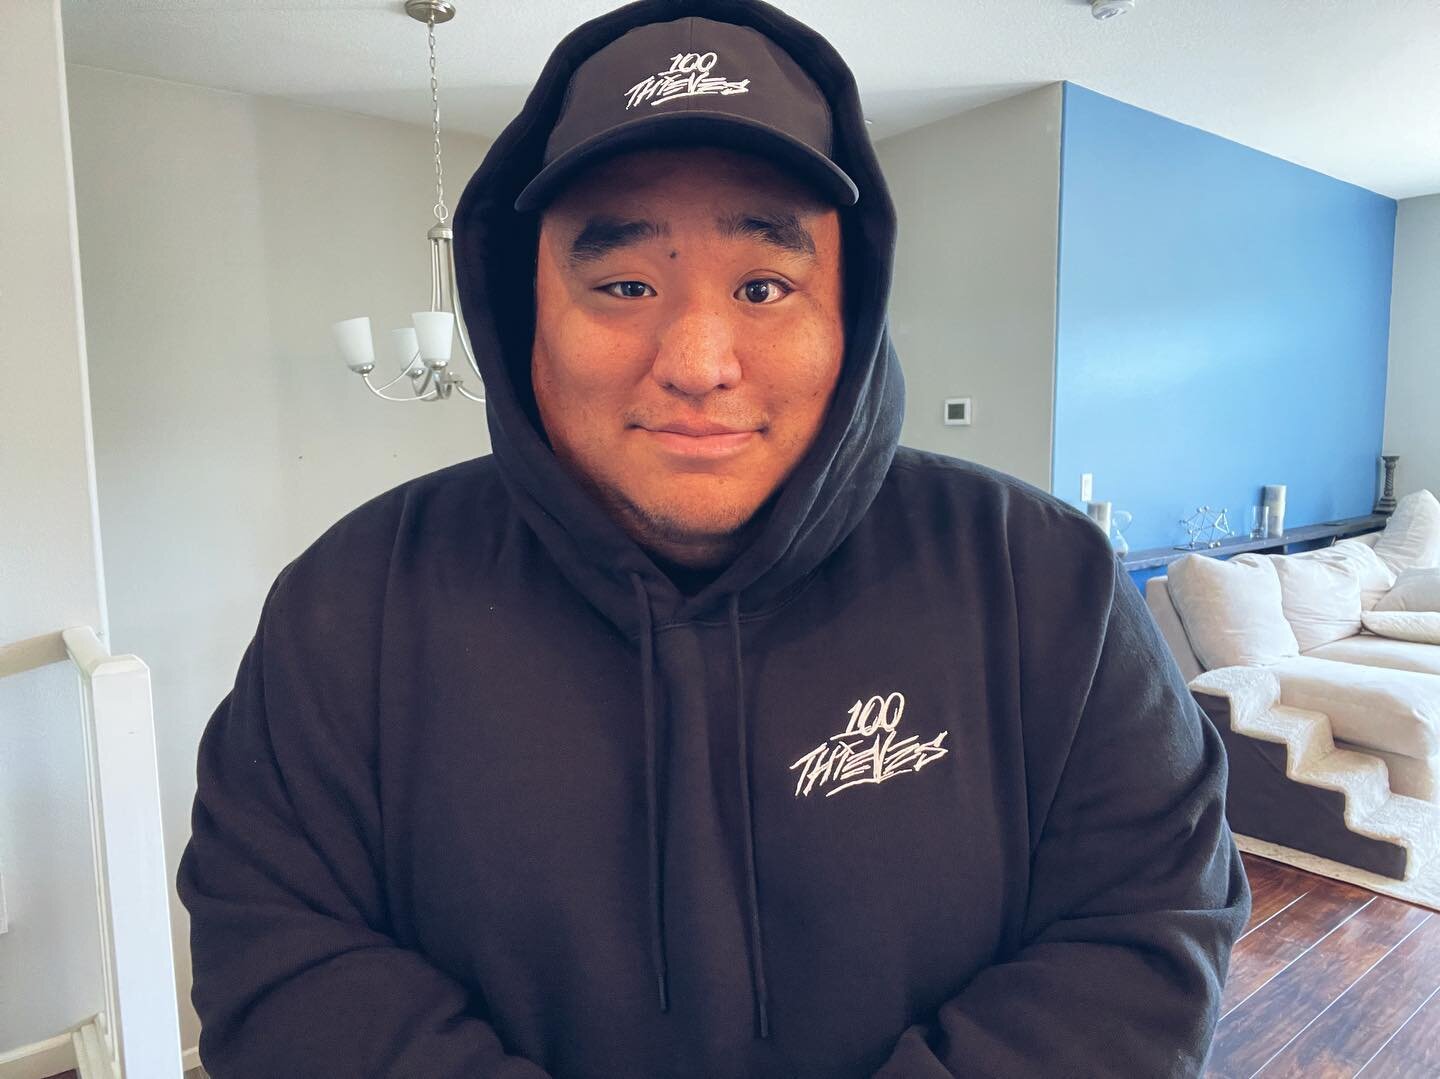 Okay, I gotta say . . . This @100Thieves #Foundations line is really REALLY nice. High quality with some weight to it. Wow wow, LESSSGO!! 🔥🔥🔥🔥 #100thieves